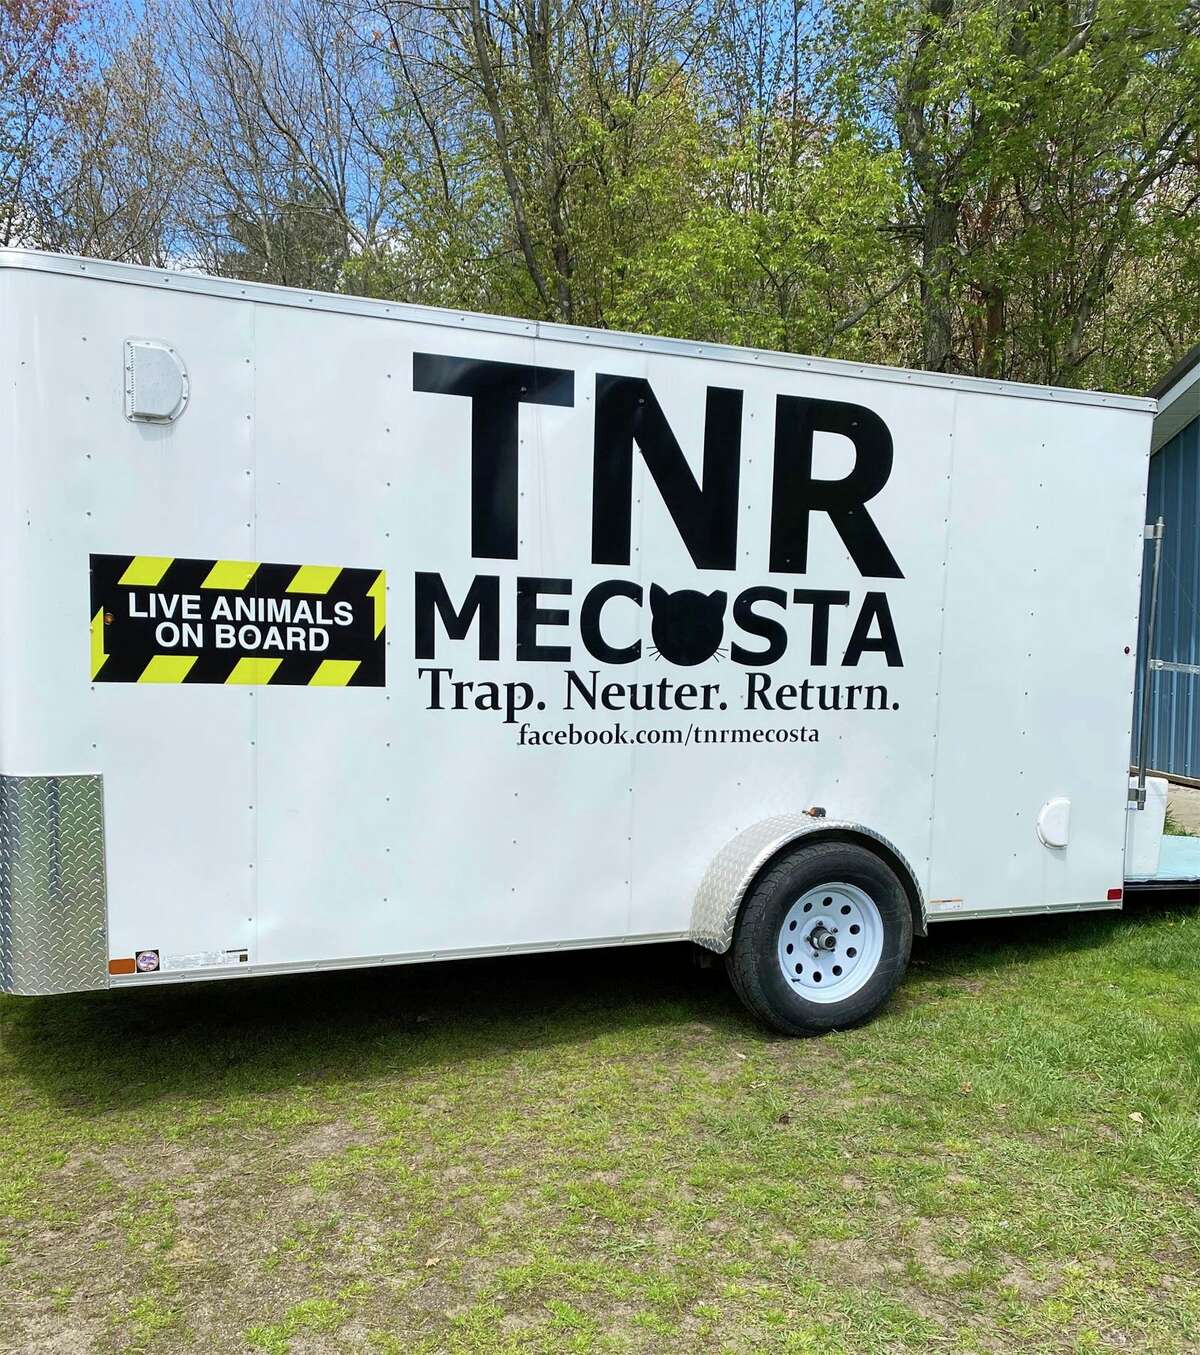 TNR Mecosta keeps feral cat colonies in check by trapping, neutering and returning them. (Courtesy photo/TNR Mecosta)